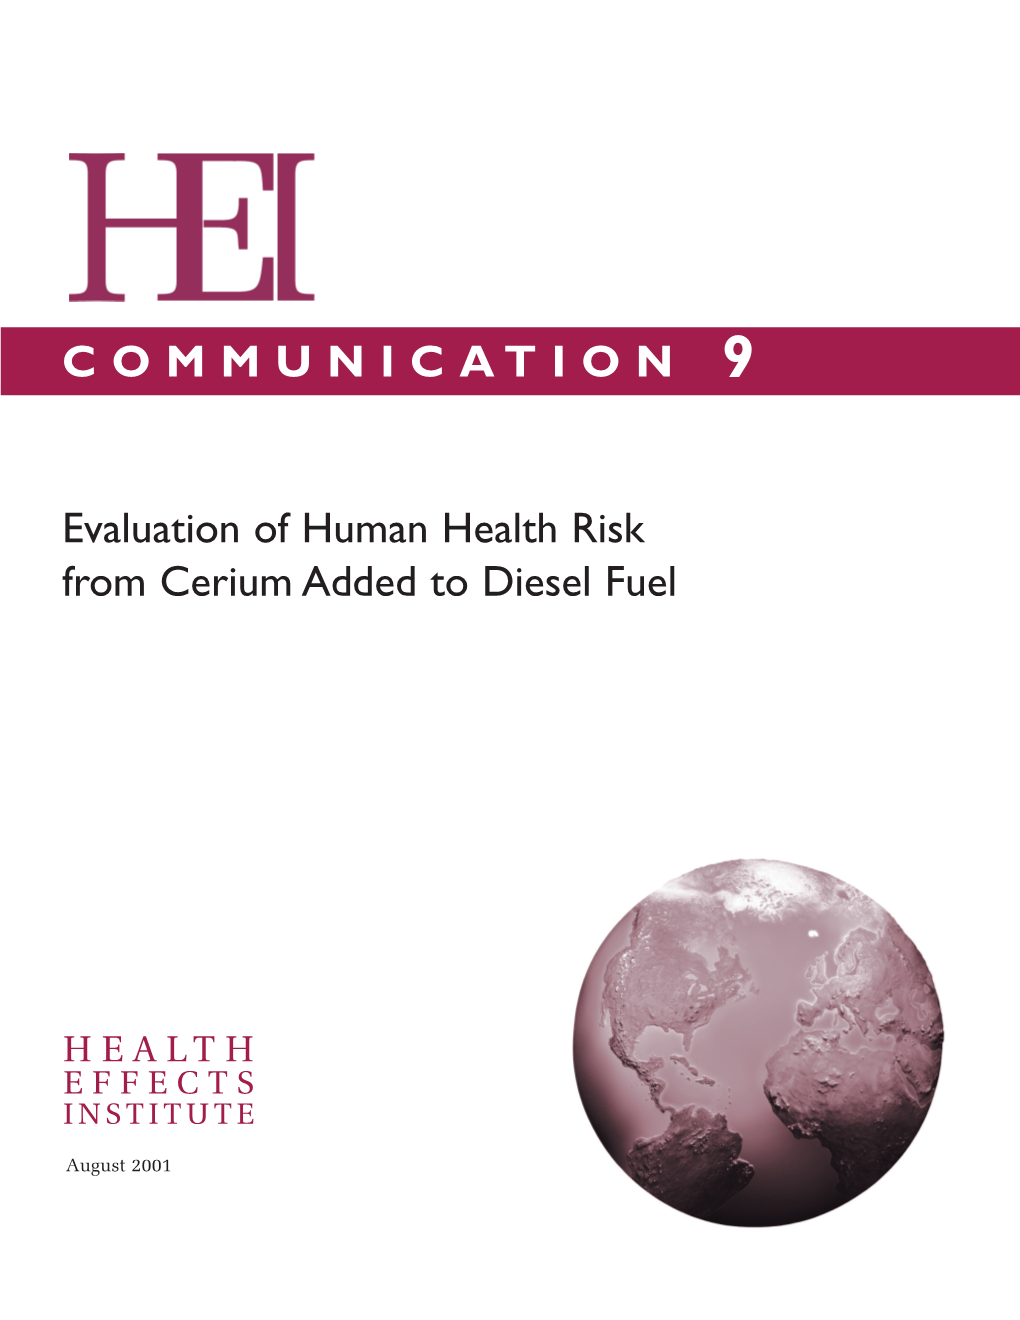 Evaluation of Human Health Risk from Cerium Added to Diesel Fuel